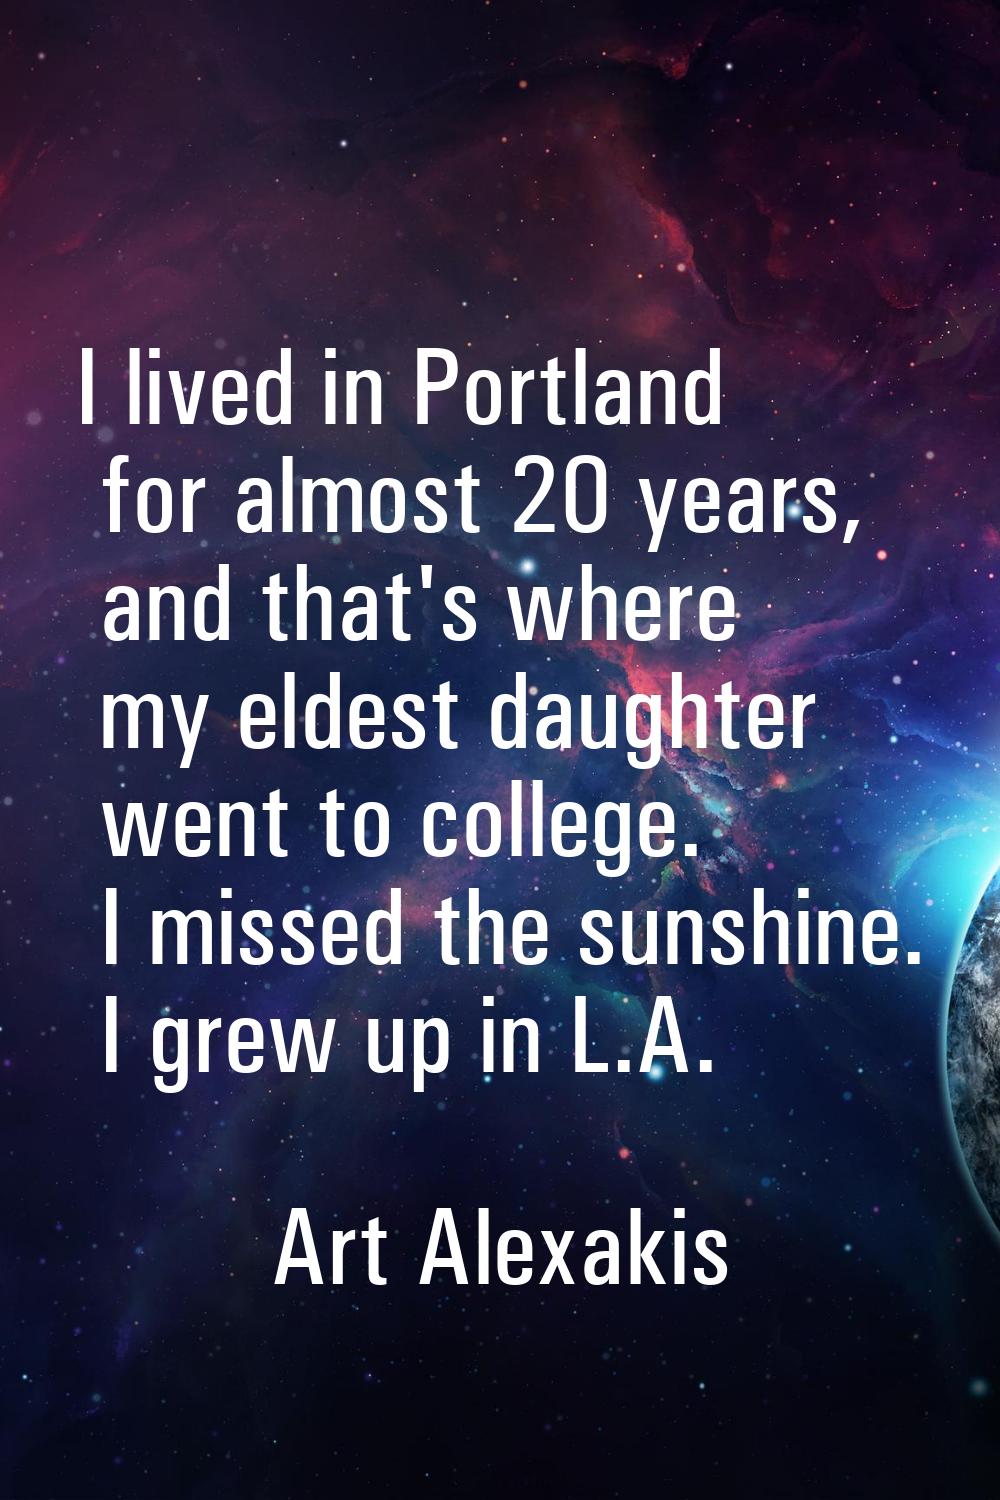 I lived in Portland for almost 20 years, and that's where my eldest daughter went to college. I mis